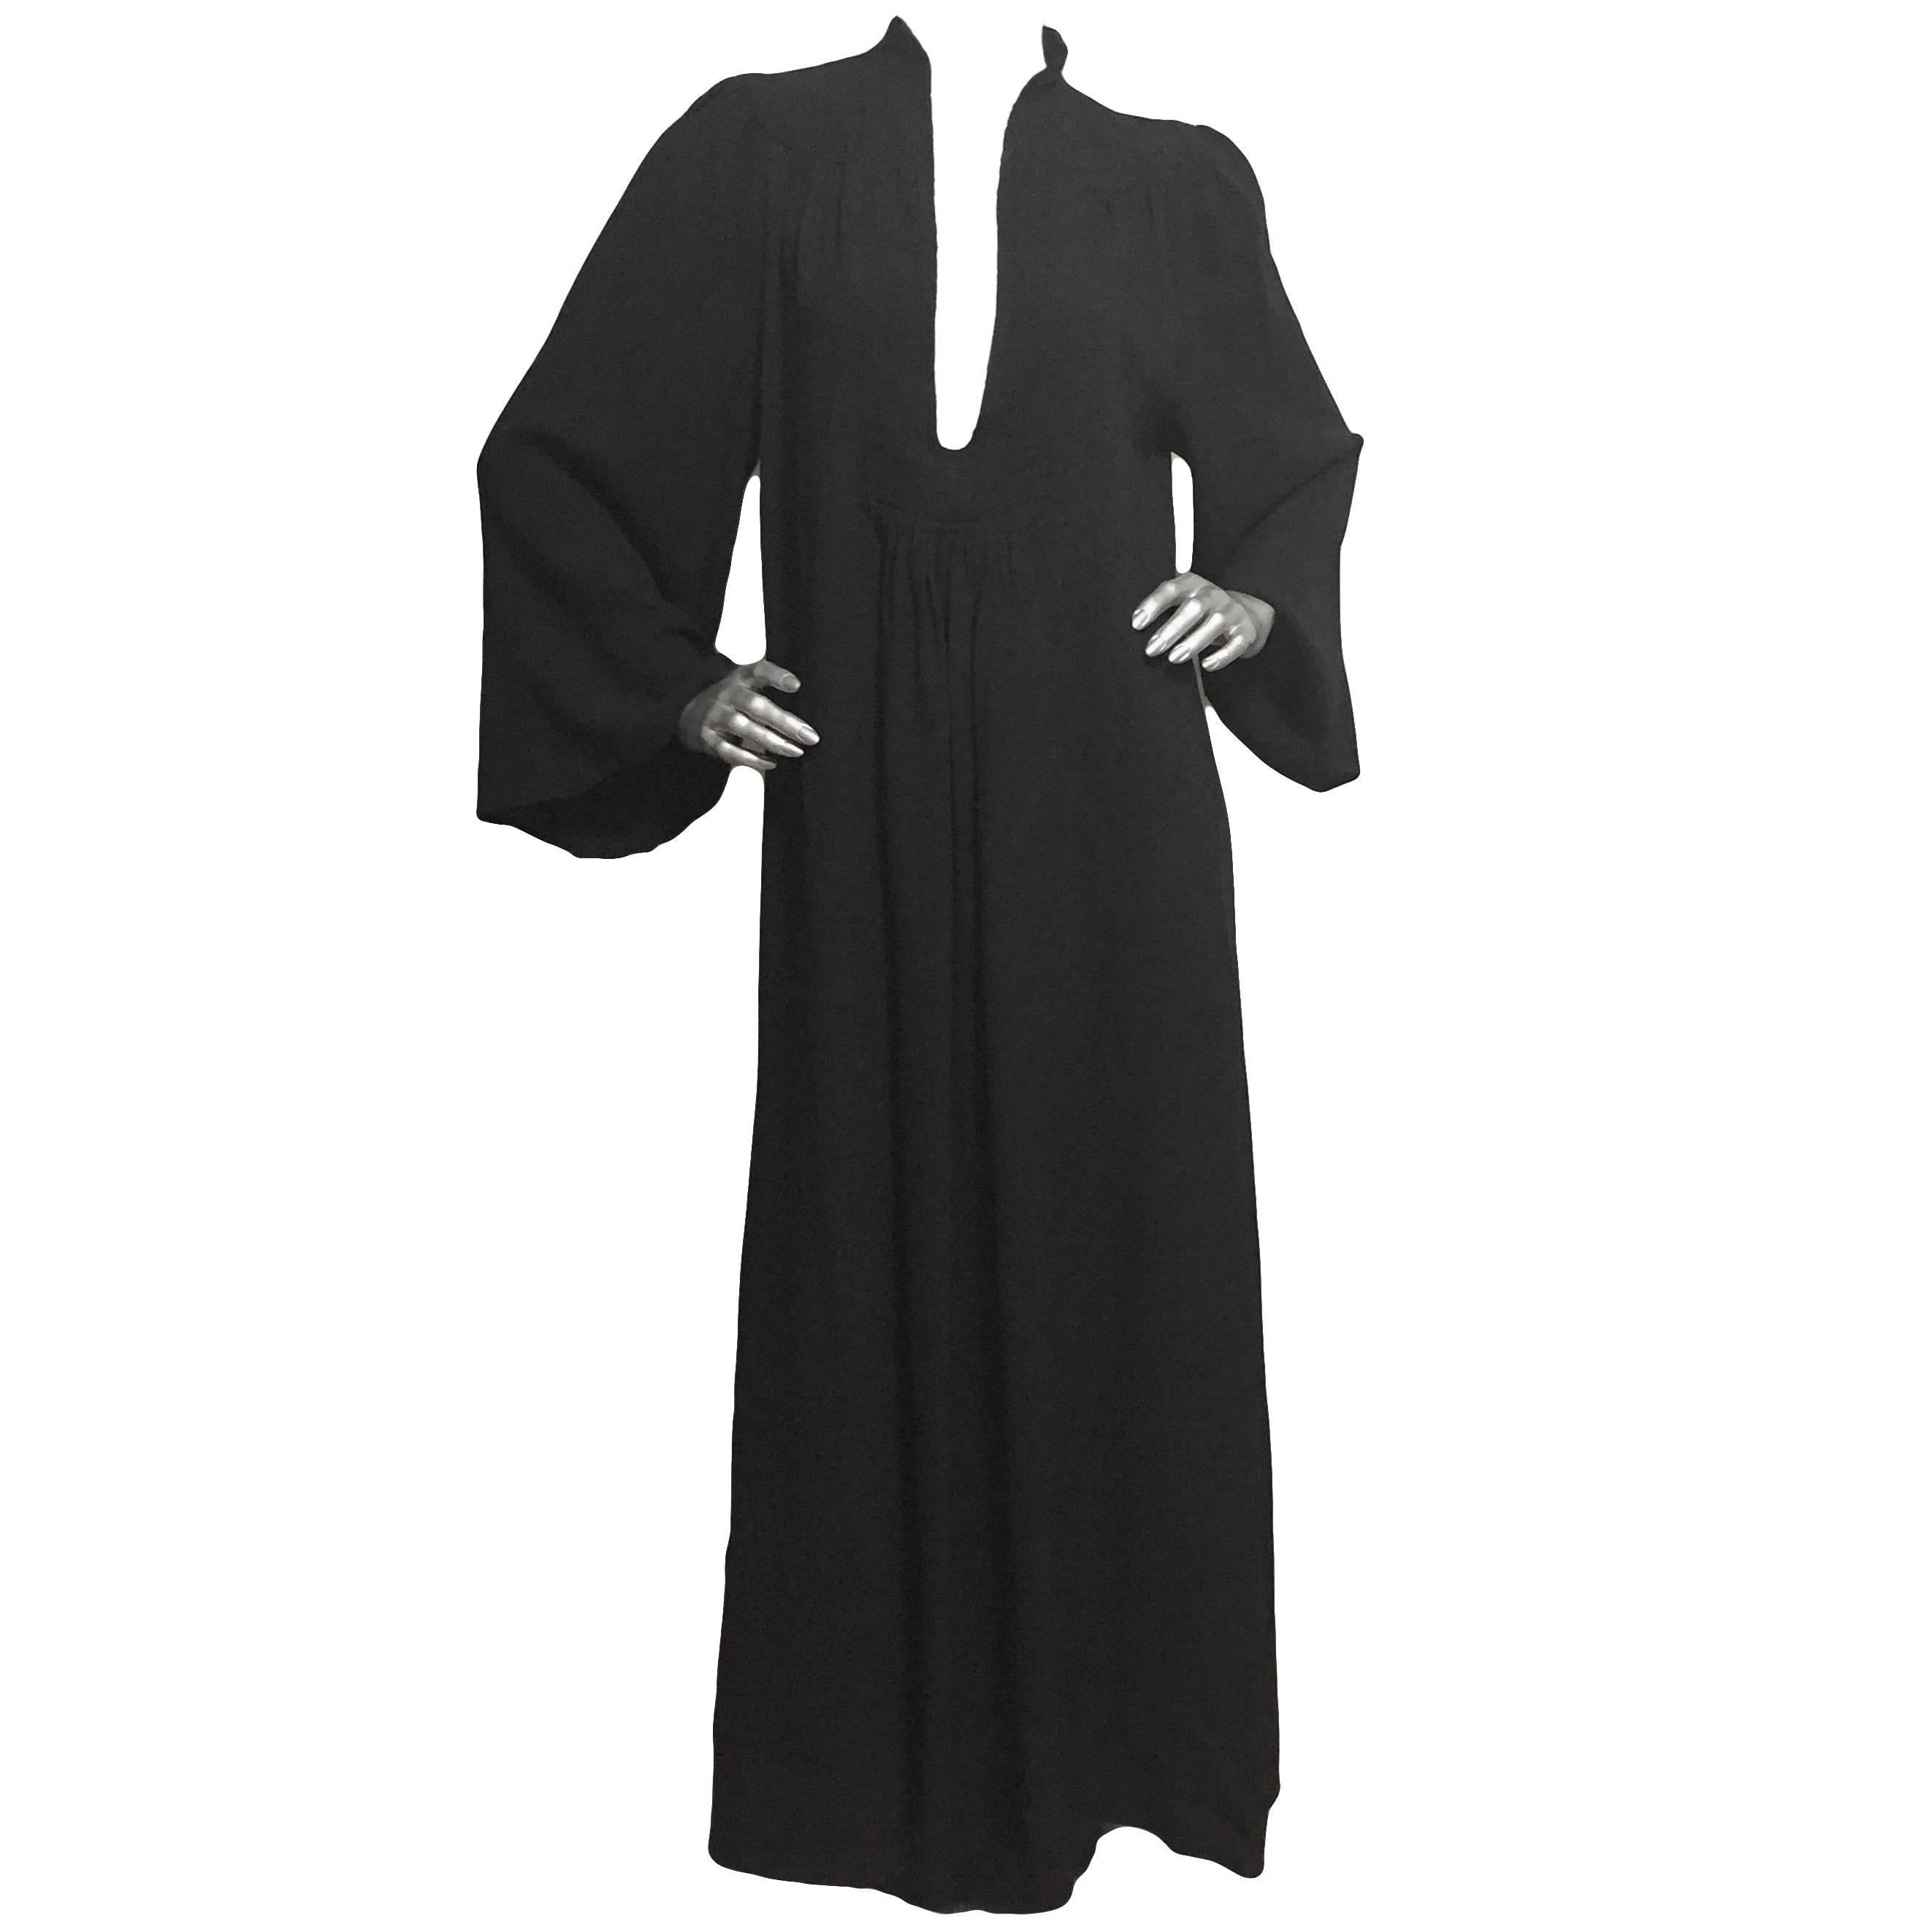 Ossie Clark Black Moss Crepe Dress with Plunging Neckline, 1970s For Sale